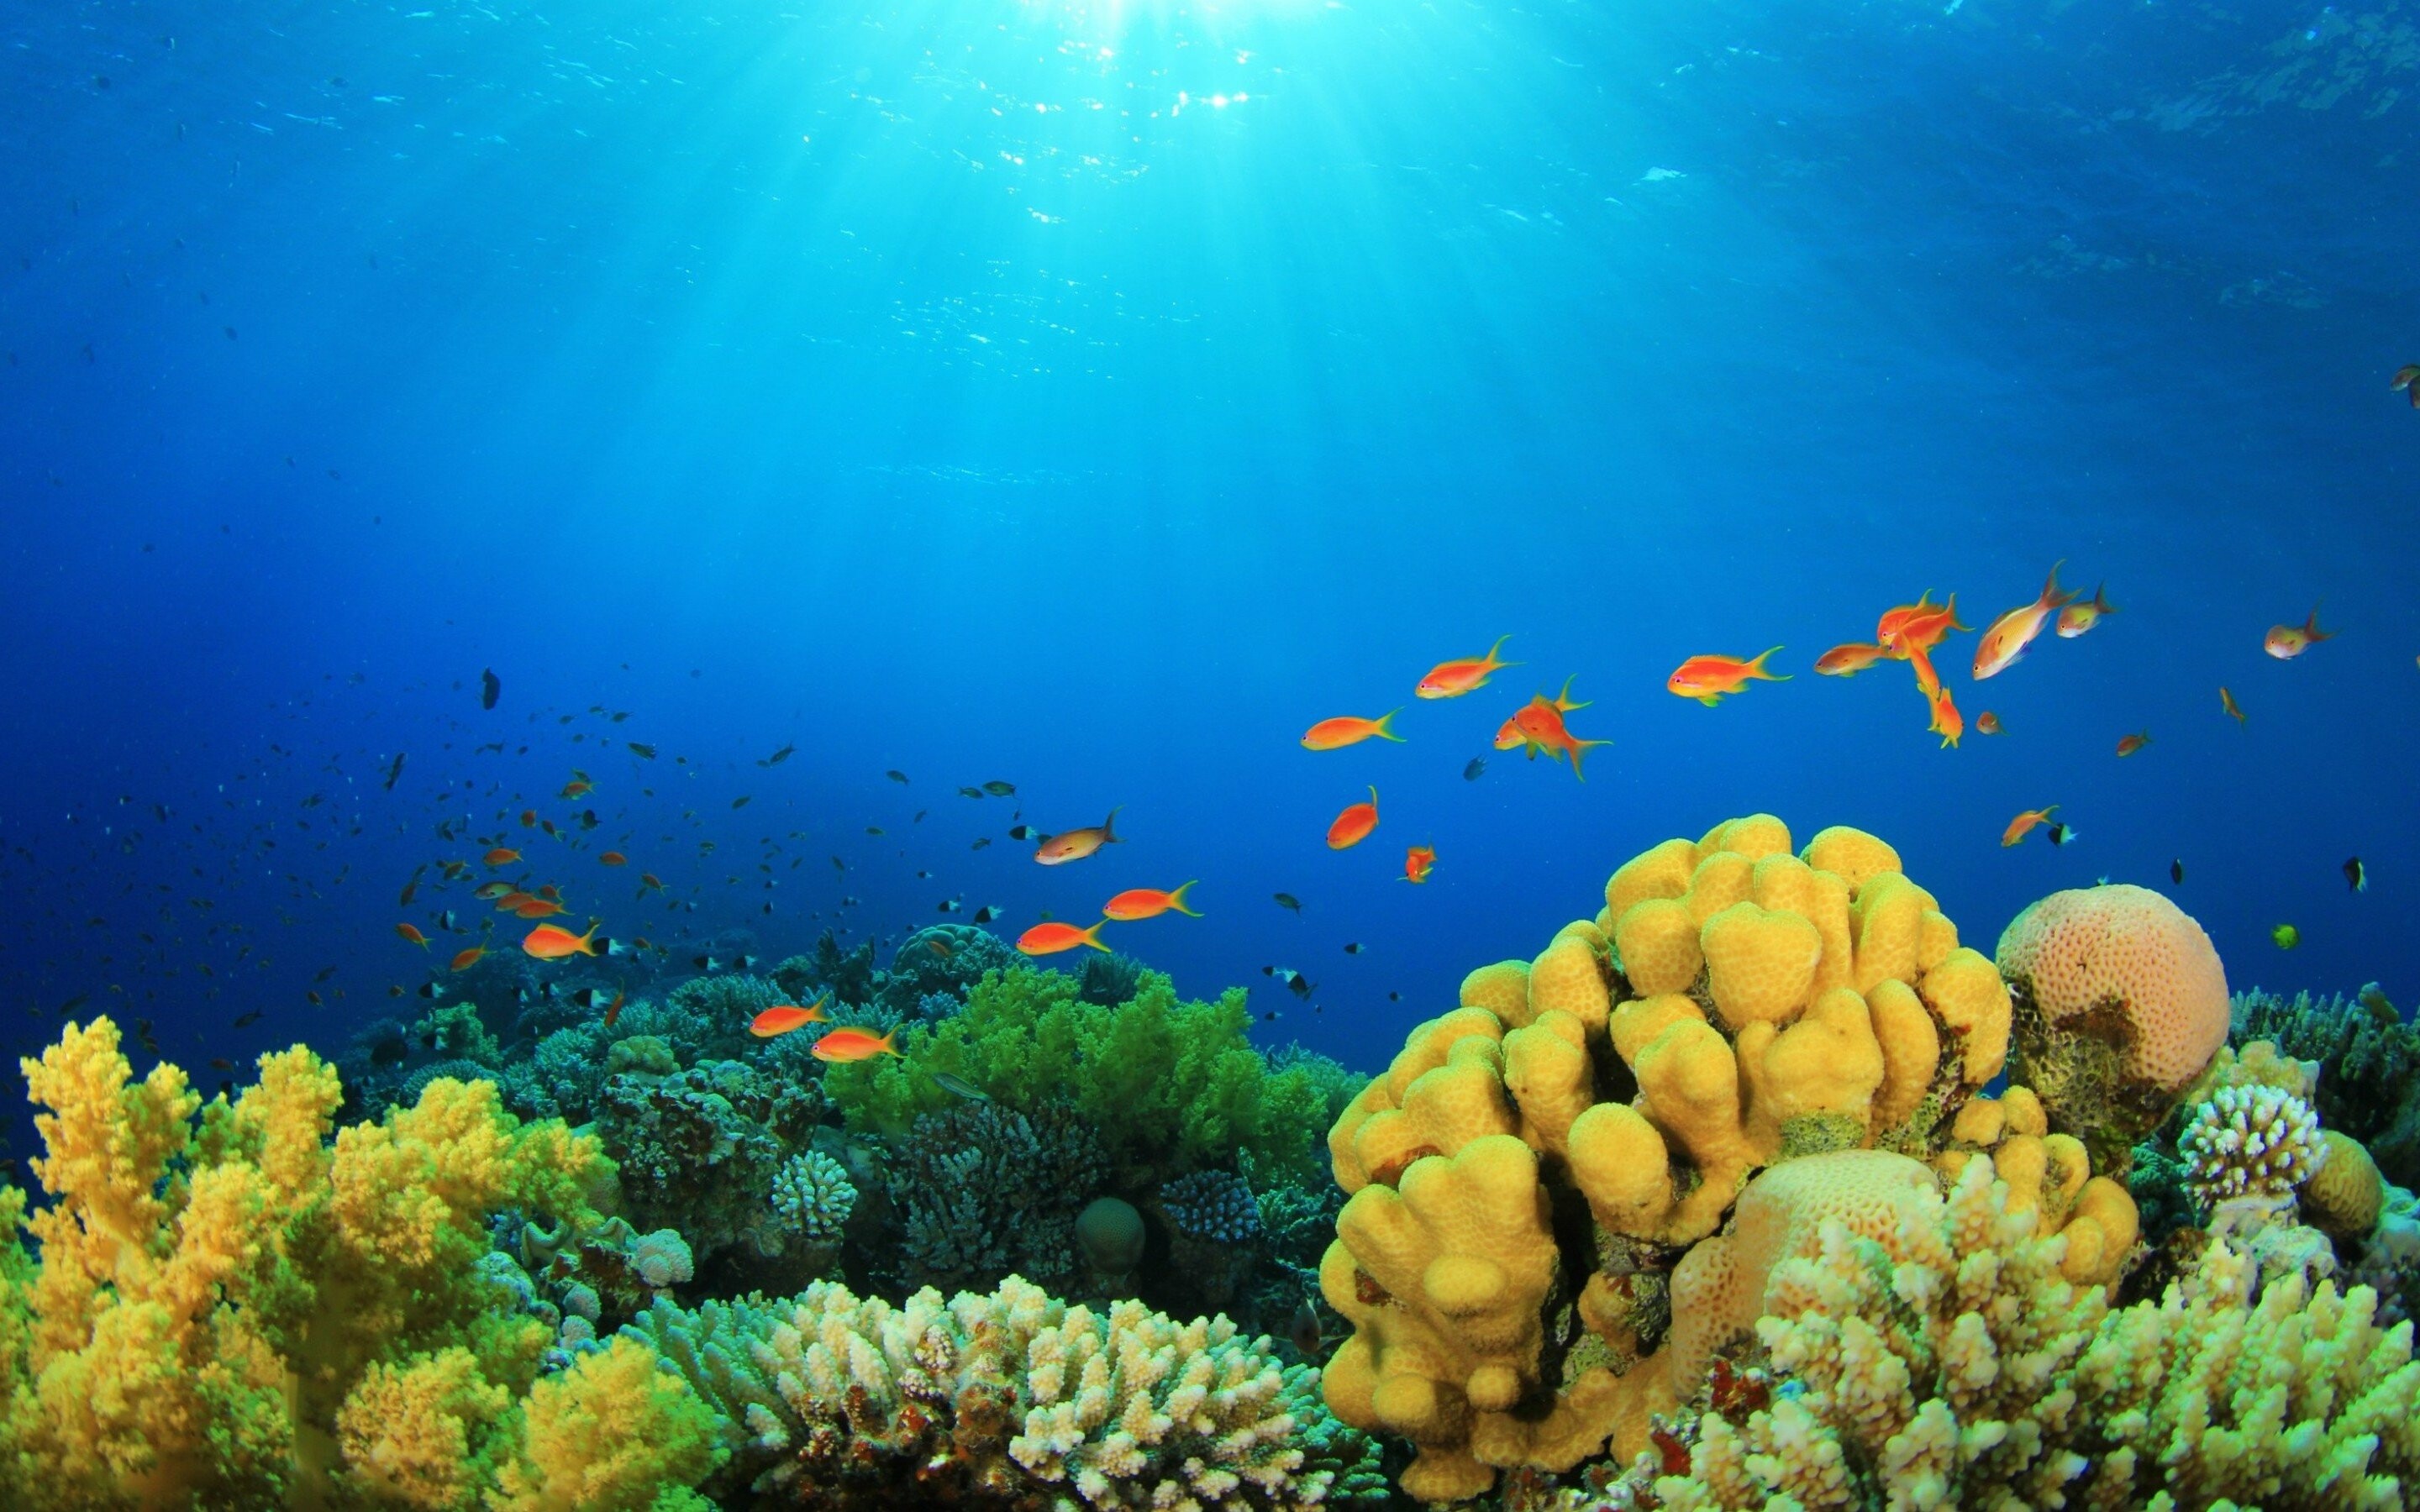 Coral Reef: Platform reefs, variously called the bank or table reefs, can form on the continental shelf, as well as in the open ocean, in fact anywhere where the seabed rises close enough to the surface of the ocean to enable the growth of reef-forming corals. 2880x1800 HD Wallpaper.